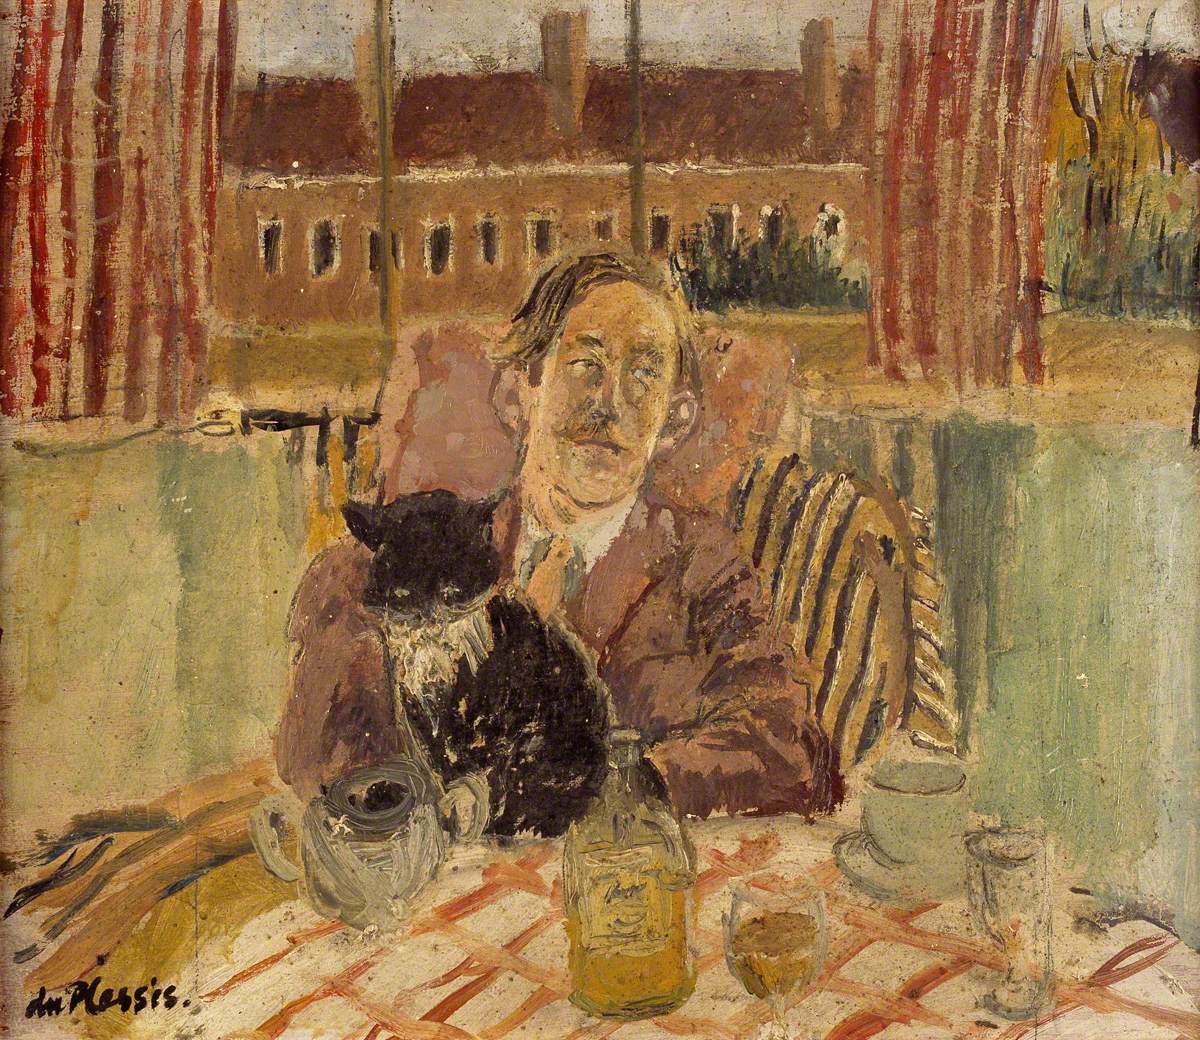 Kyffin Williams (1918–2006), Seated at a Table